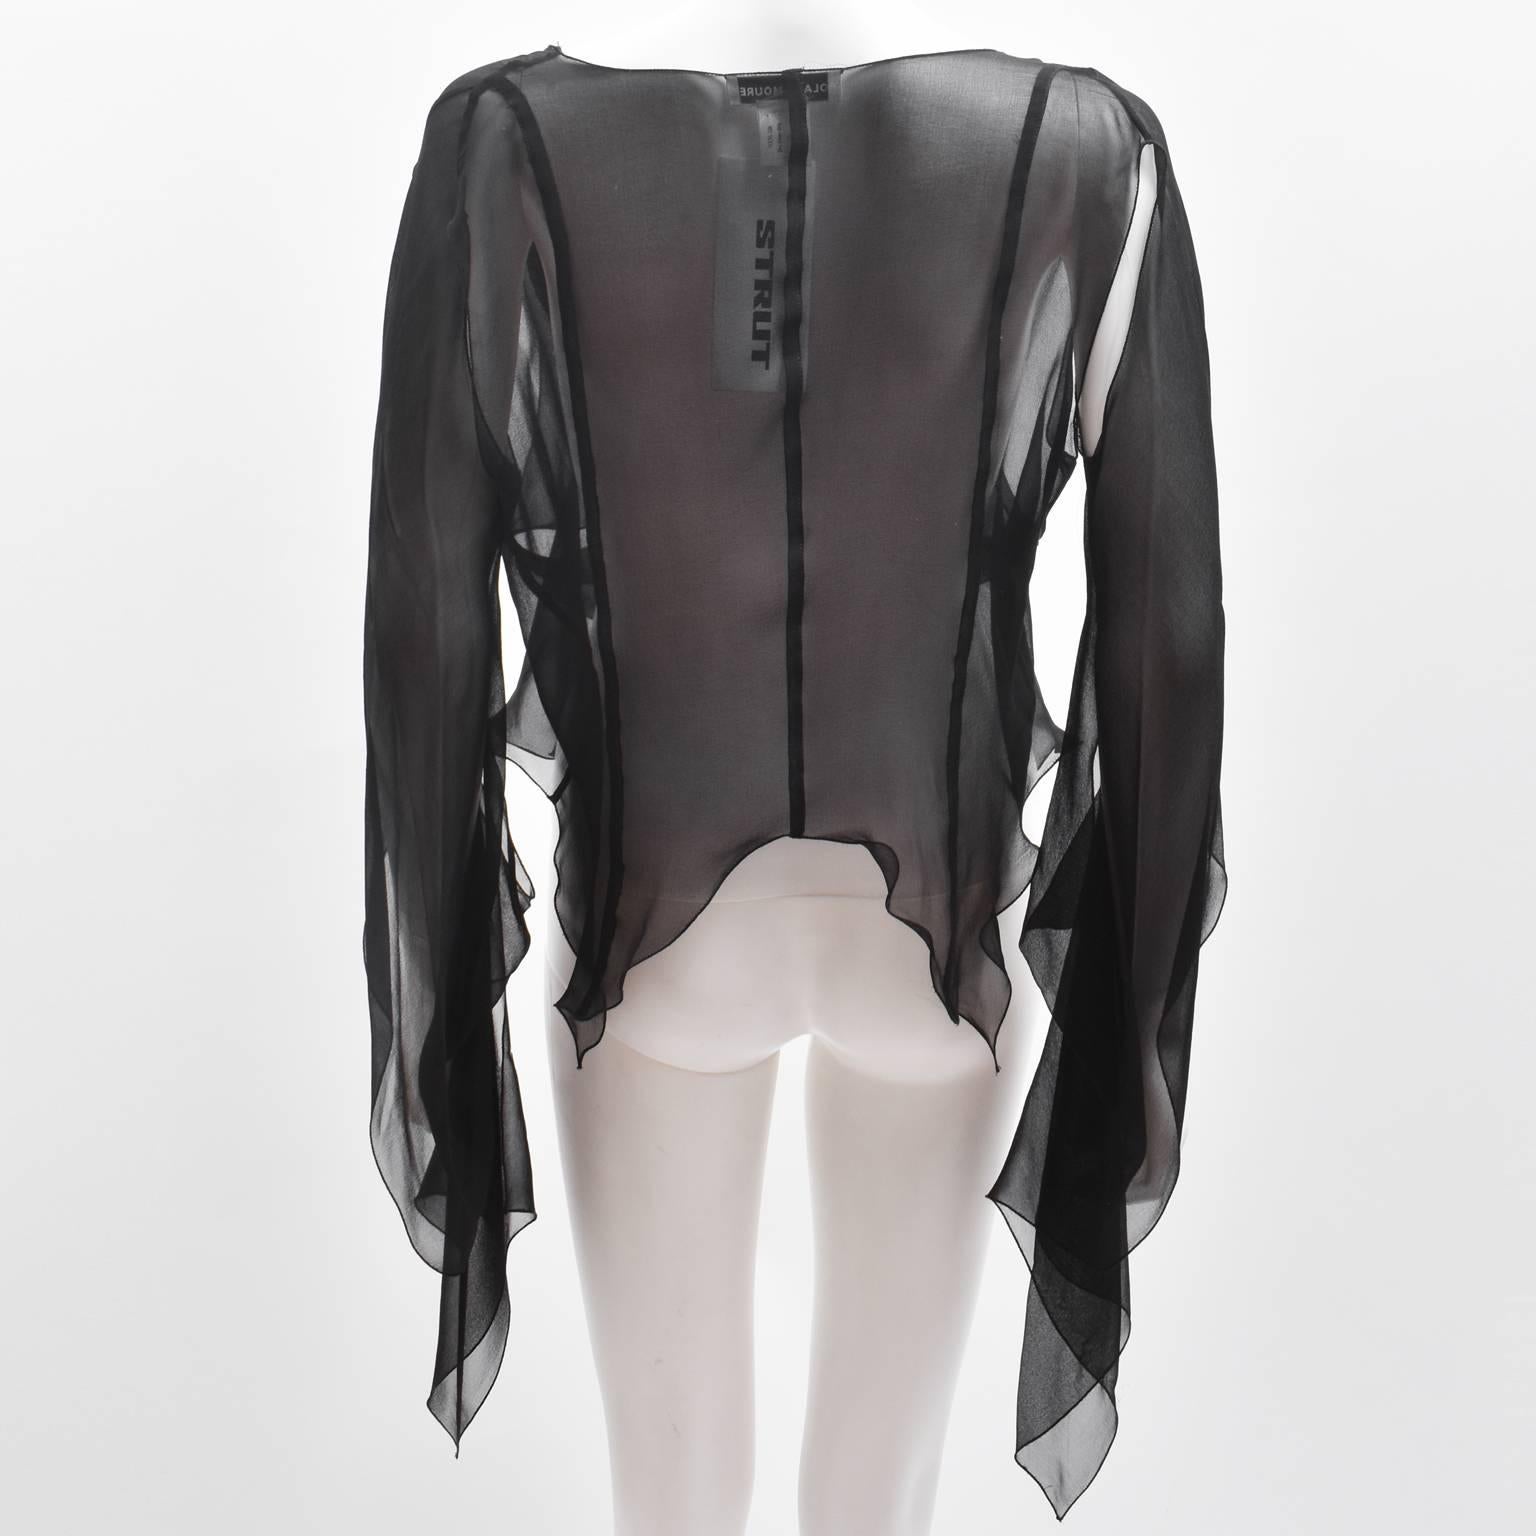 Roland Mouret Black Sheer Silk Tie Blouse with Cut-Out Details c.2010 For Sale 2